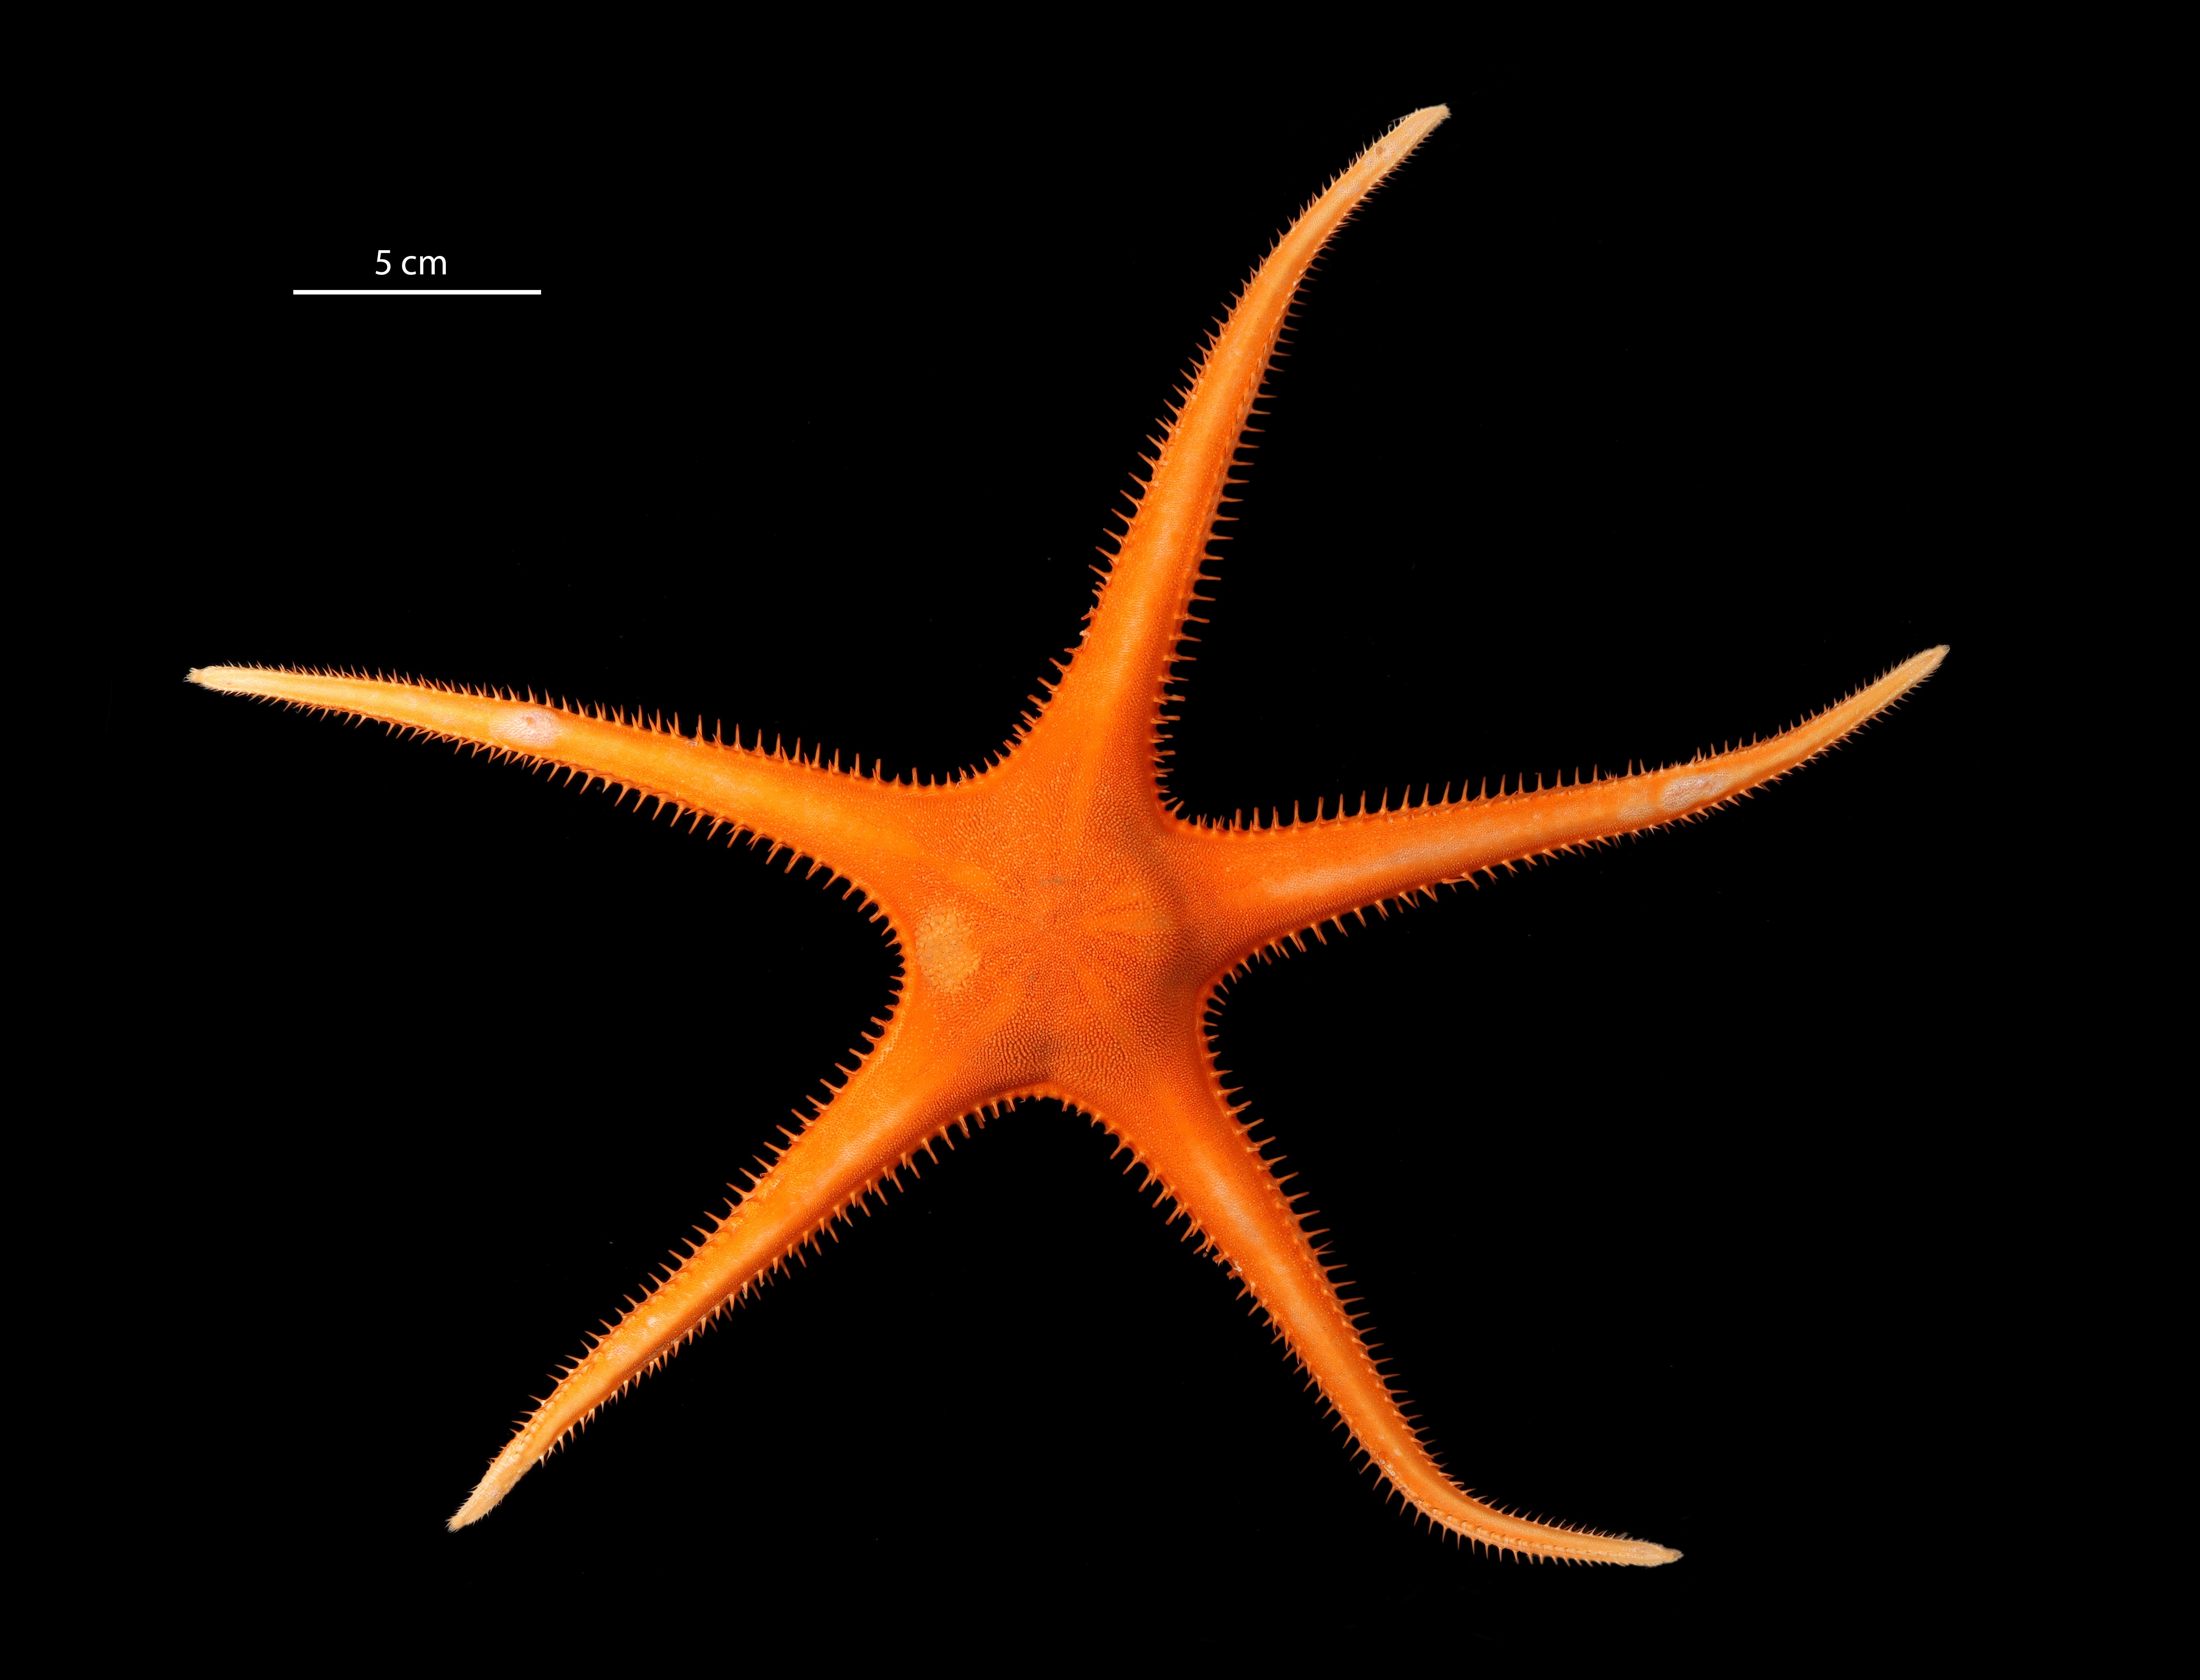 An unknown species of sea star in the genus Dytaster (Photo: SMARTEX Project, Natural Environment Research Council, UK smartexccz.org)